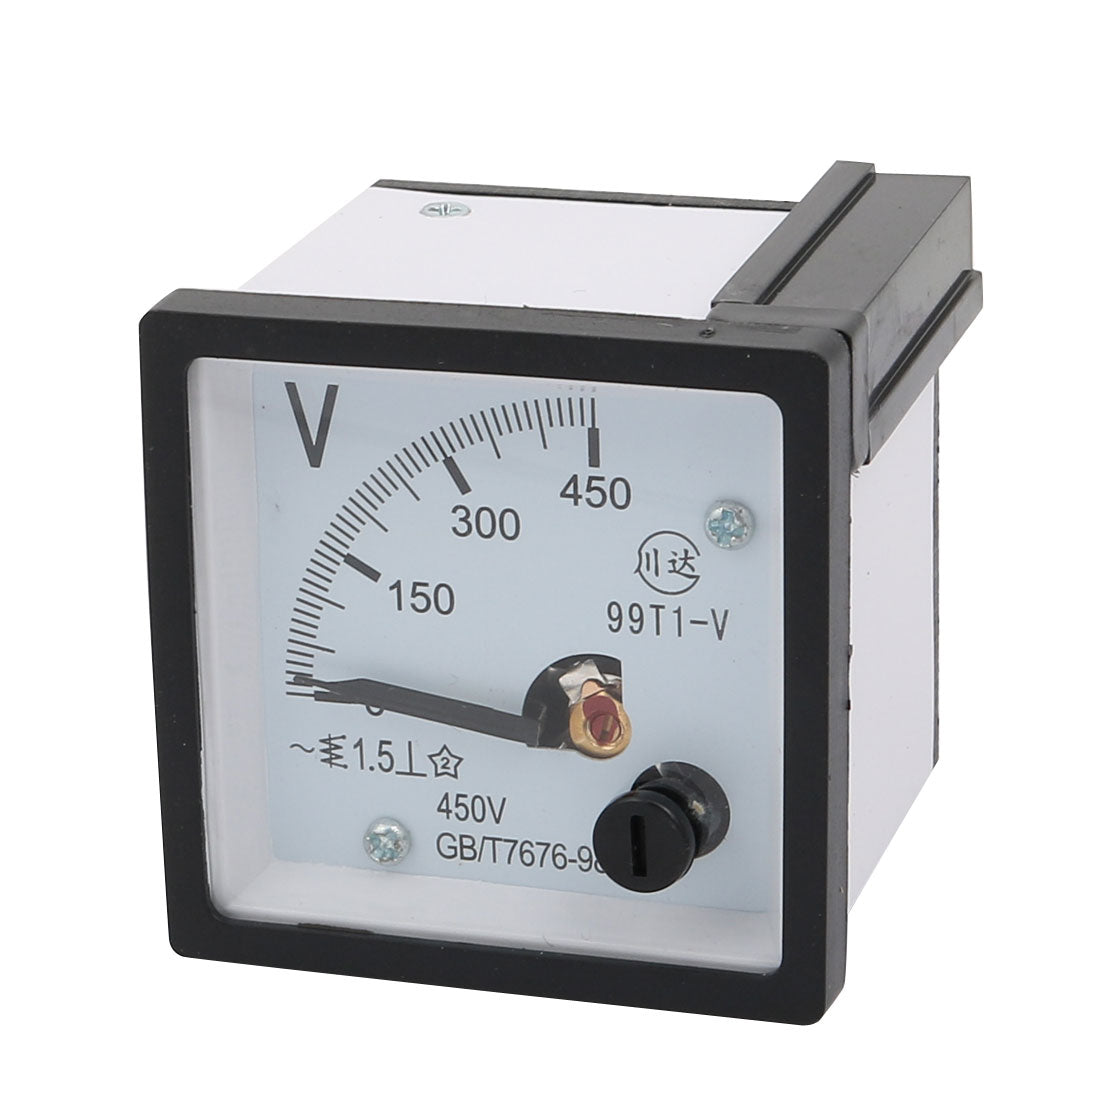 uxcell Uxcell AC 0-450V Fine Tuning Dial Panel Analog Voltage Meter Voltmeter White Black